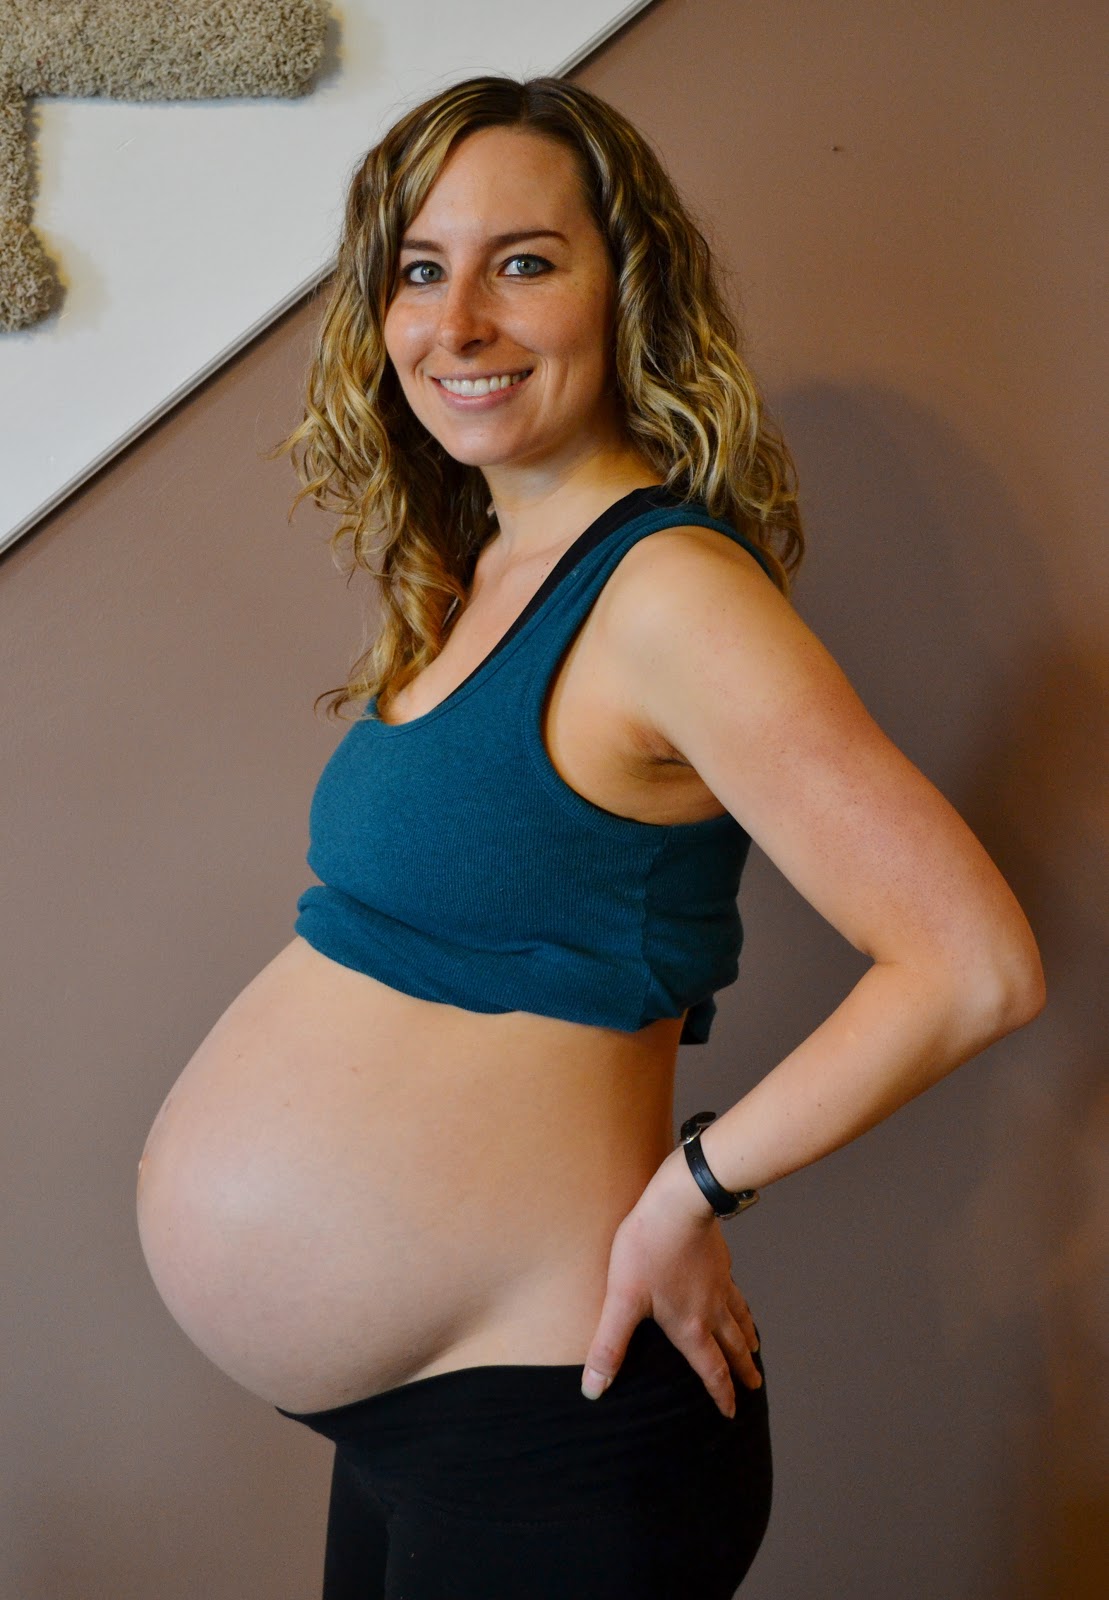 And baby just keeps growing despite being so crowded inside your 39 weeks p...